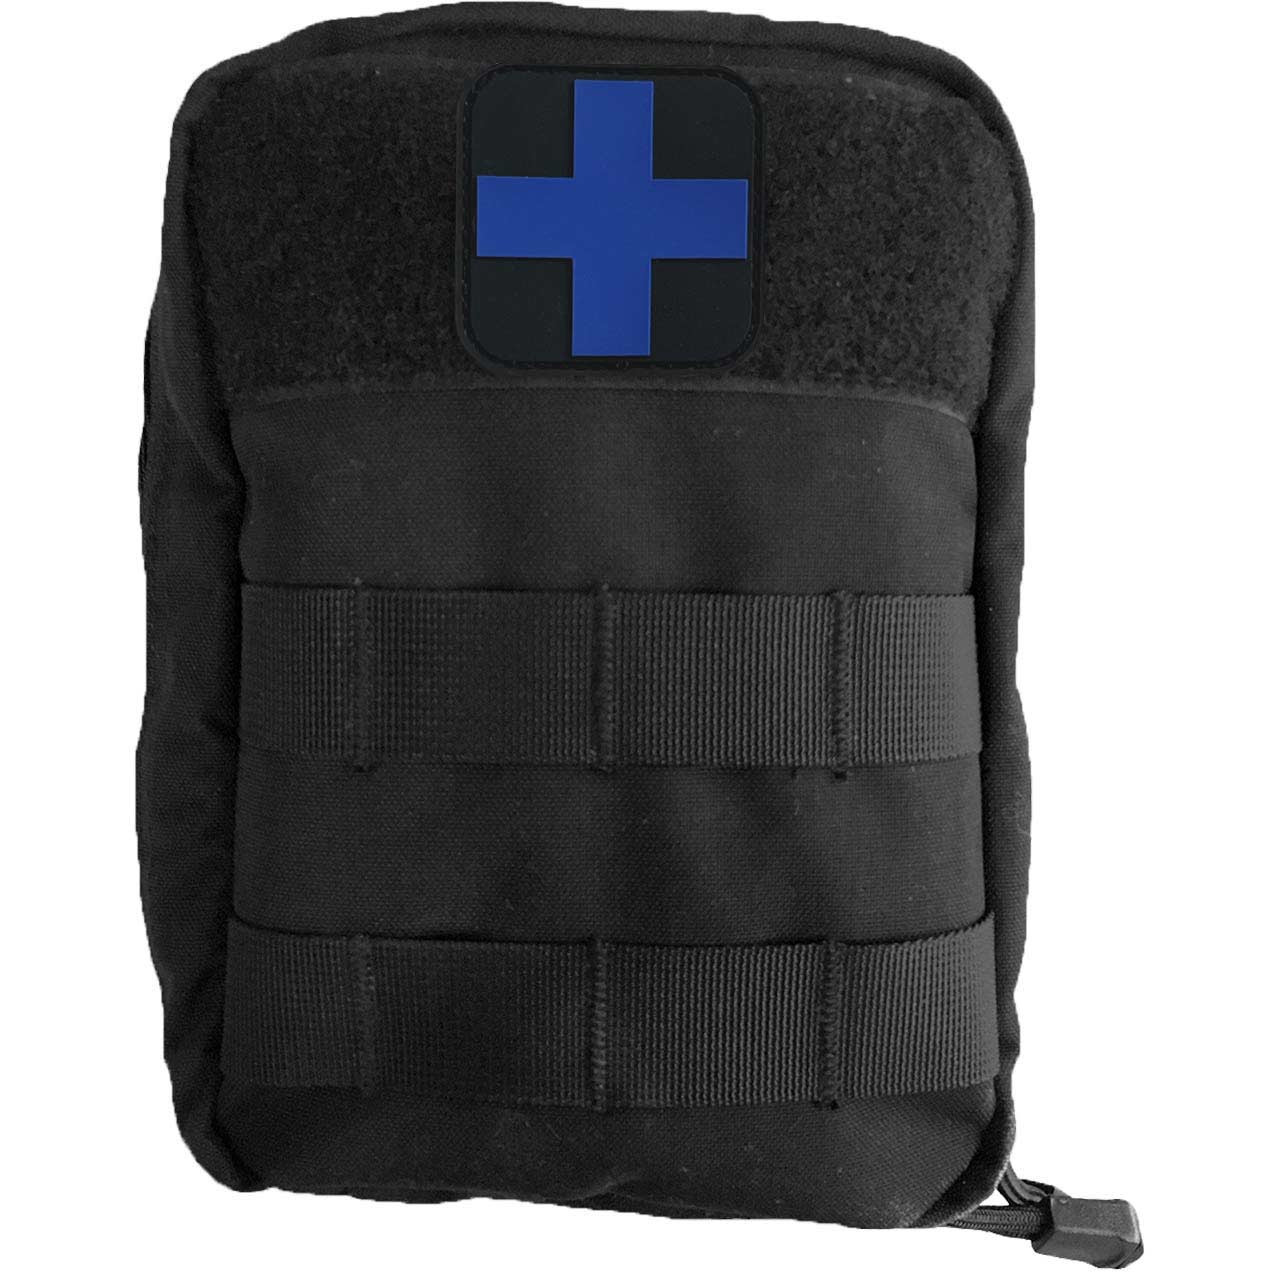 Medical Cross Patch, POWNEW Tactical First Aid Med Patches Velcro Perfect  for IFAK Trauma Pouch, EMT, EMS, EDC Bag - 6 Pcs